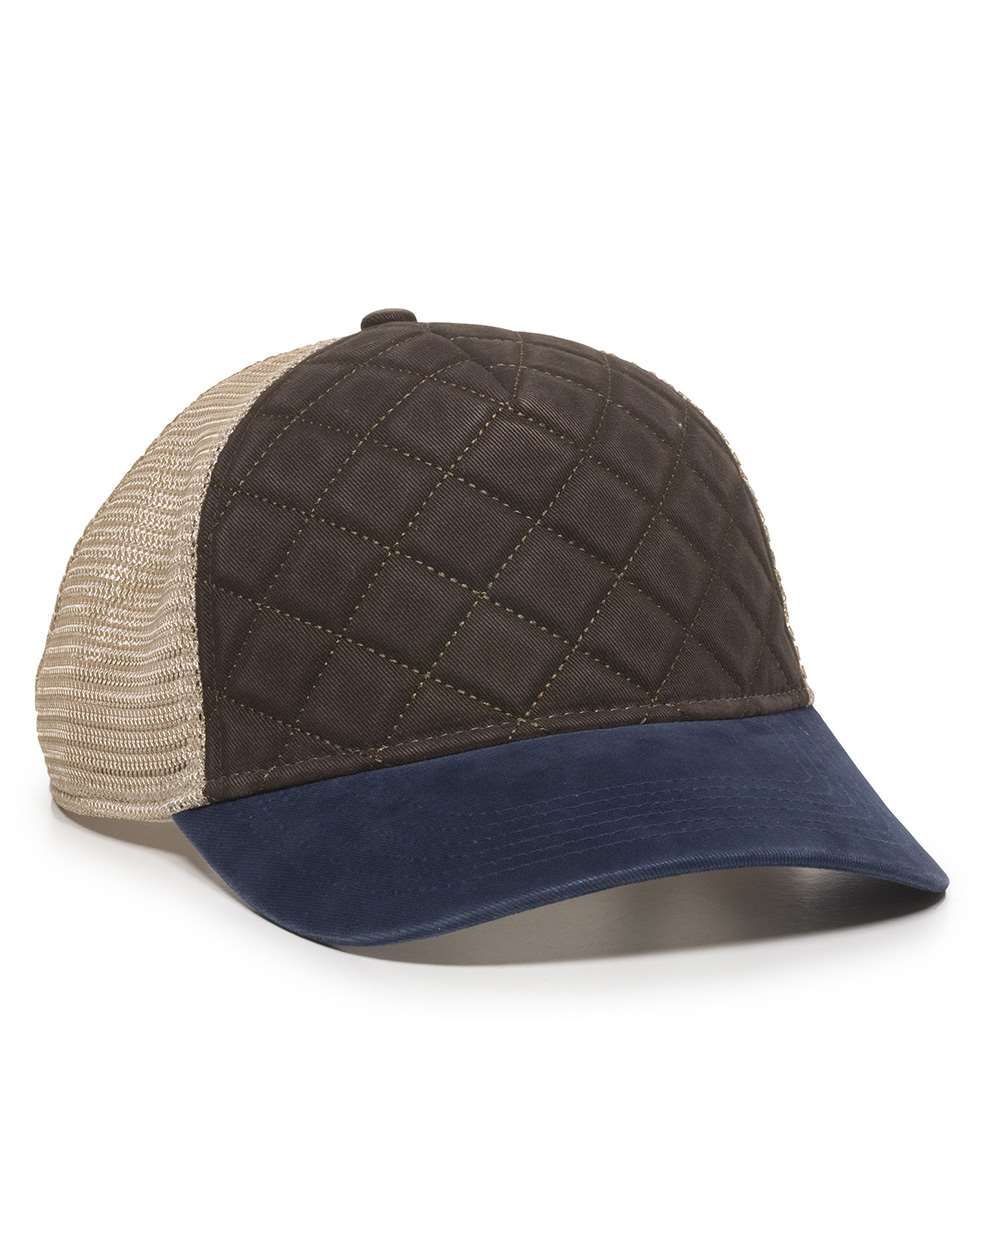 Outdoor Cap QLT100M - Quilted Front Mesh Back Cap